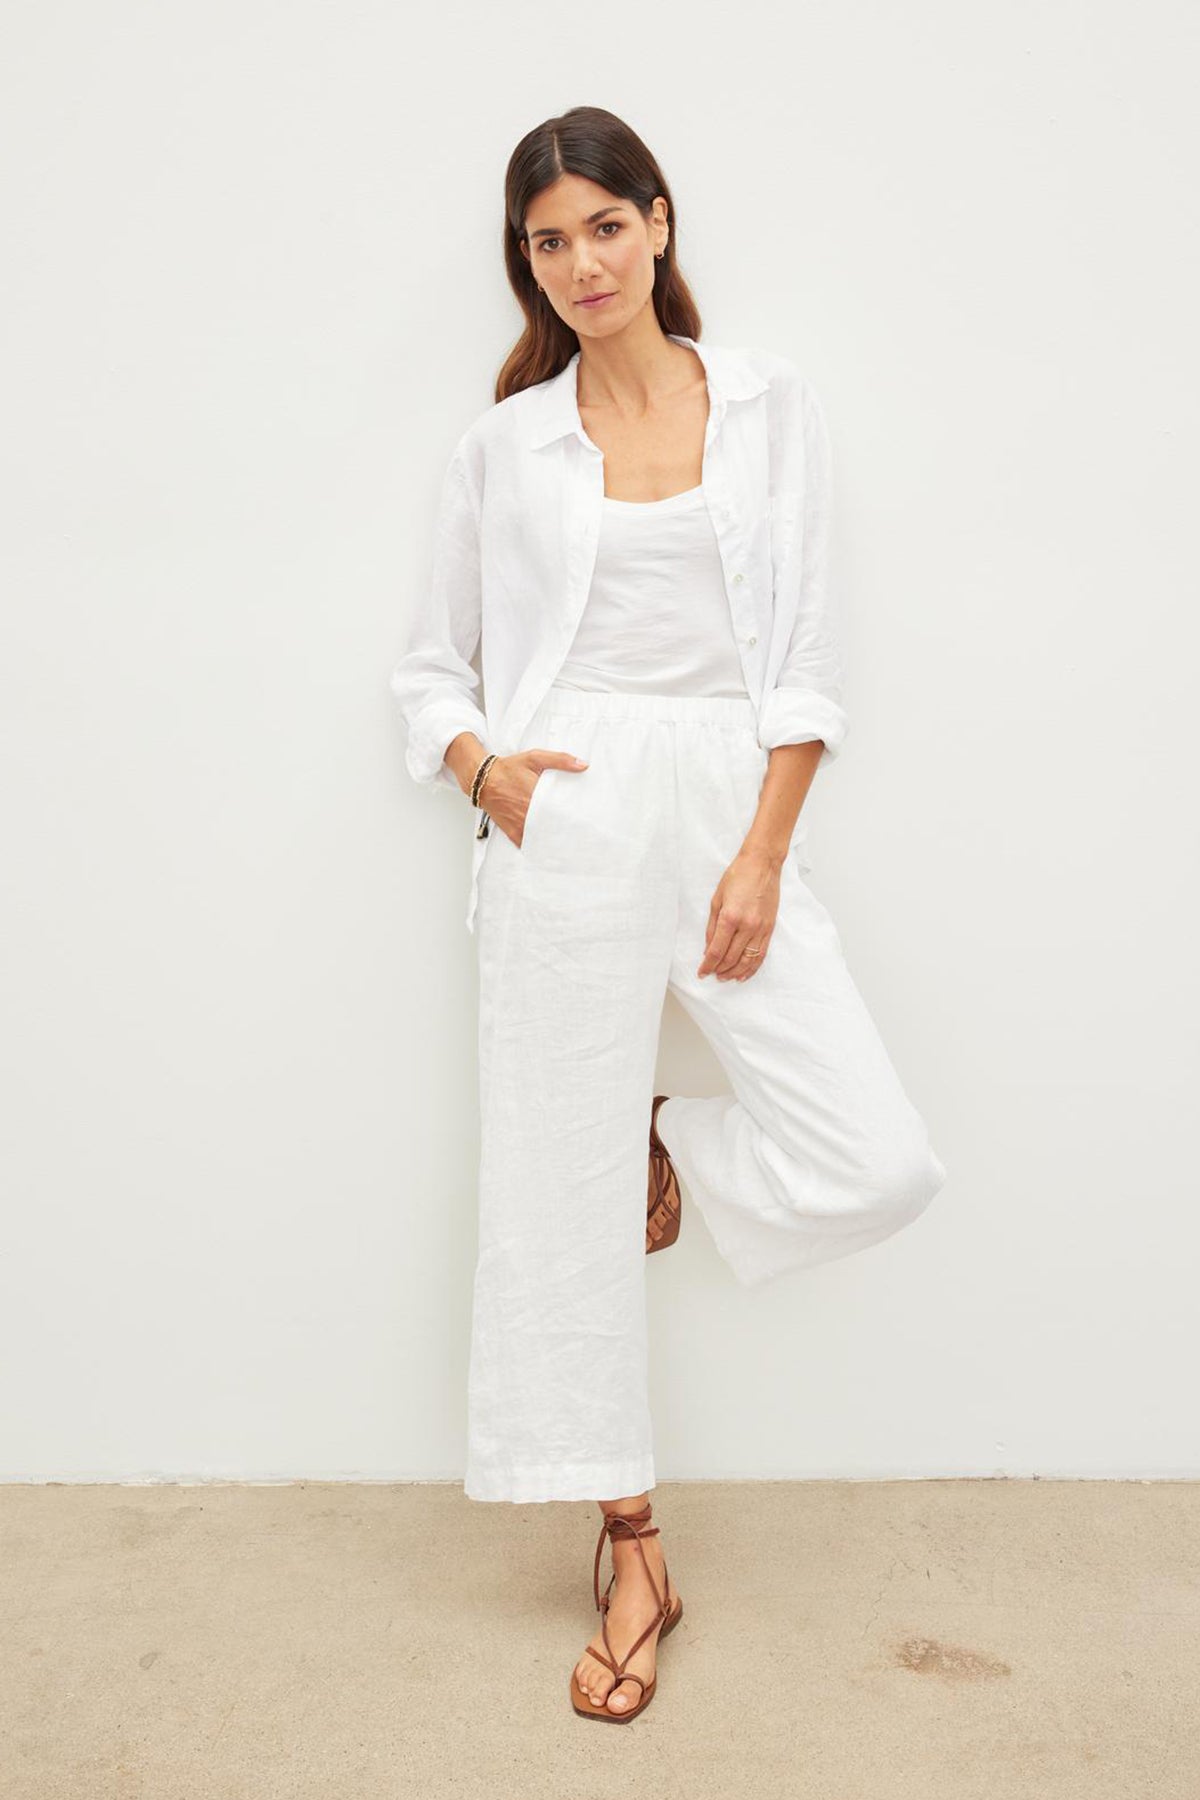   Woman in a white button-up shirt, white tank top, and Velvet by Graham & Spencer LOLA LINEN PANT stands against a plain wall. She is wearing brown sandals and has one hand in her pocket. 